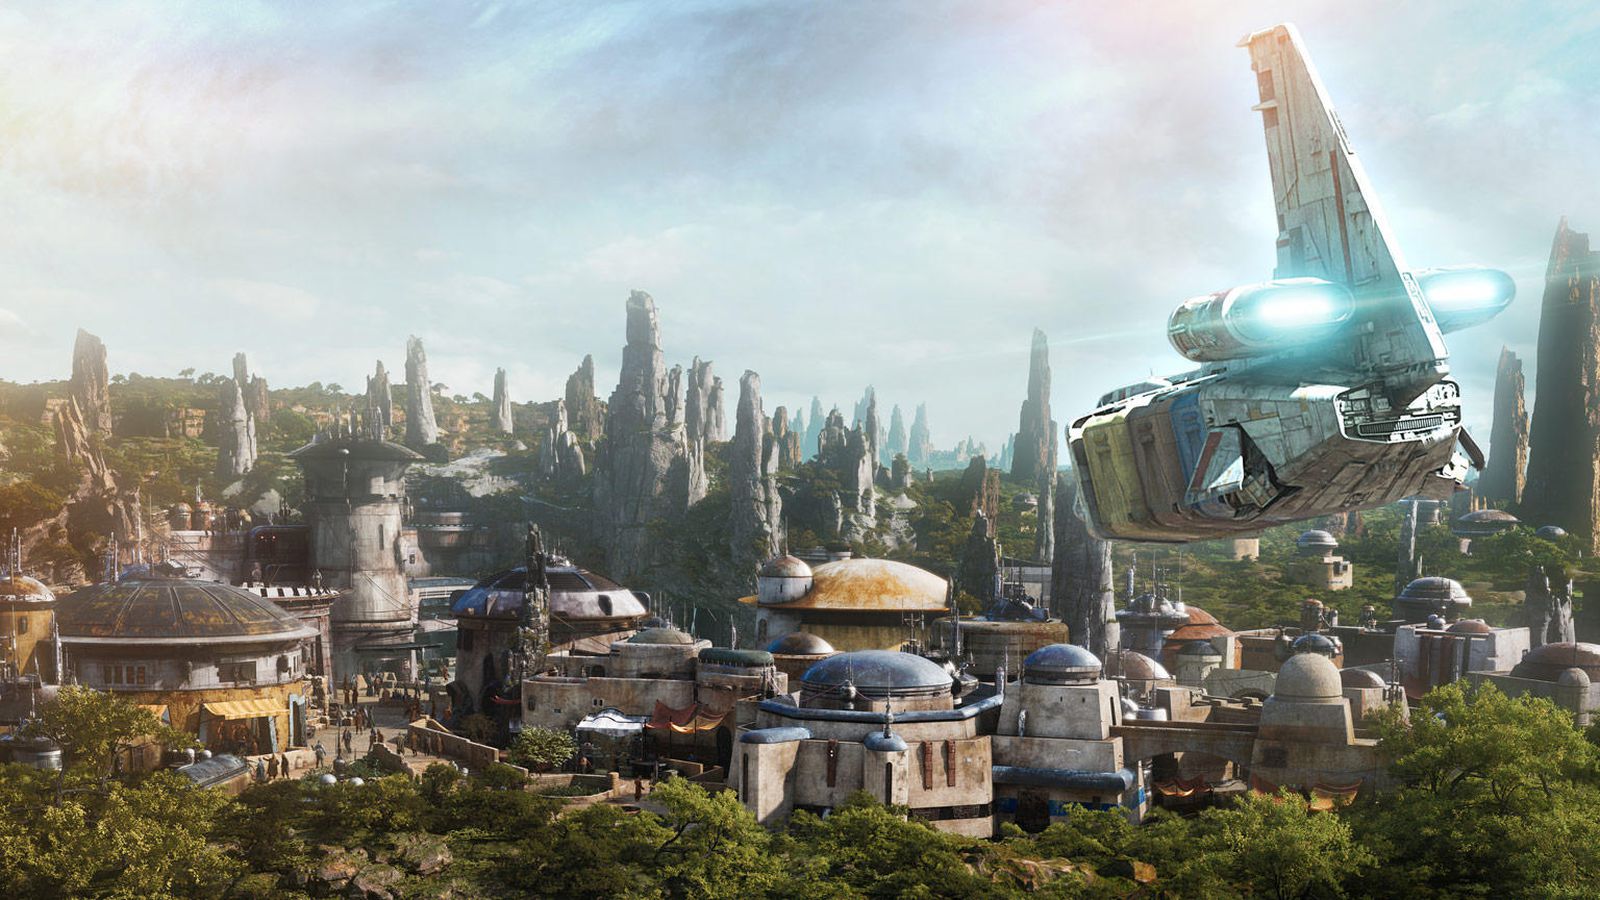 Star Wars in Orlando - coming 2019